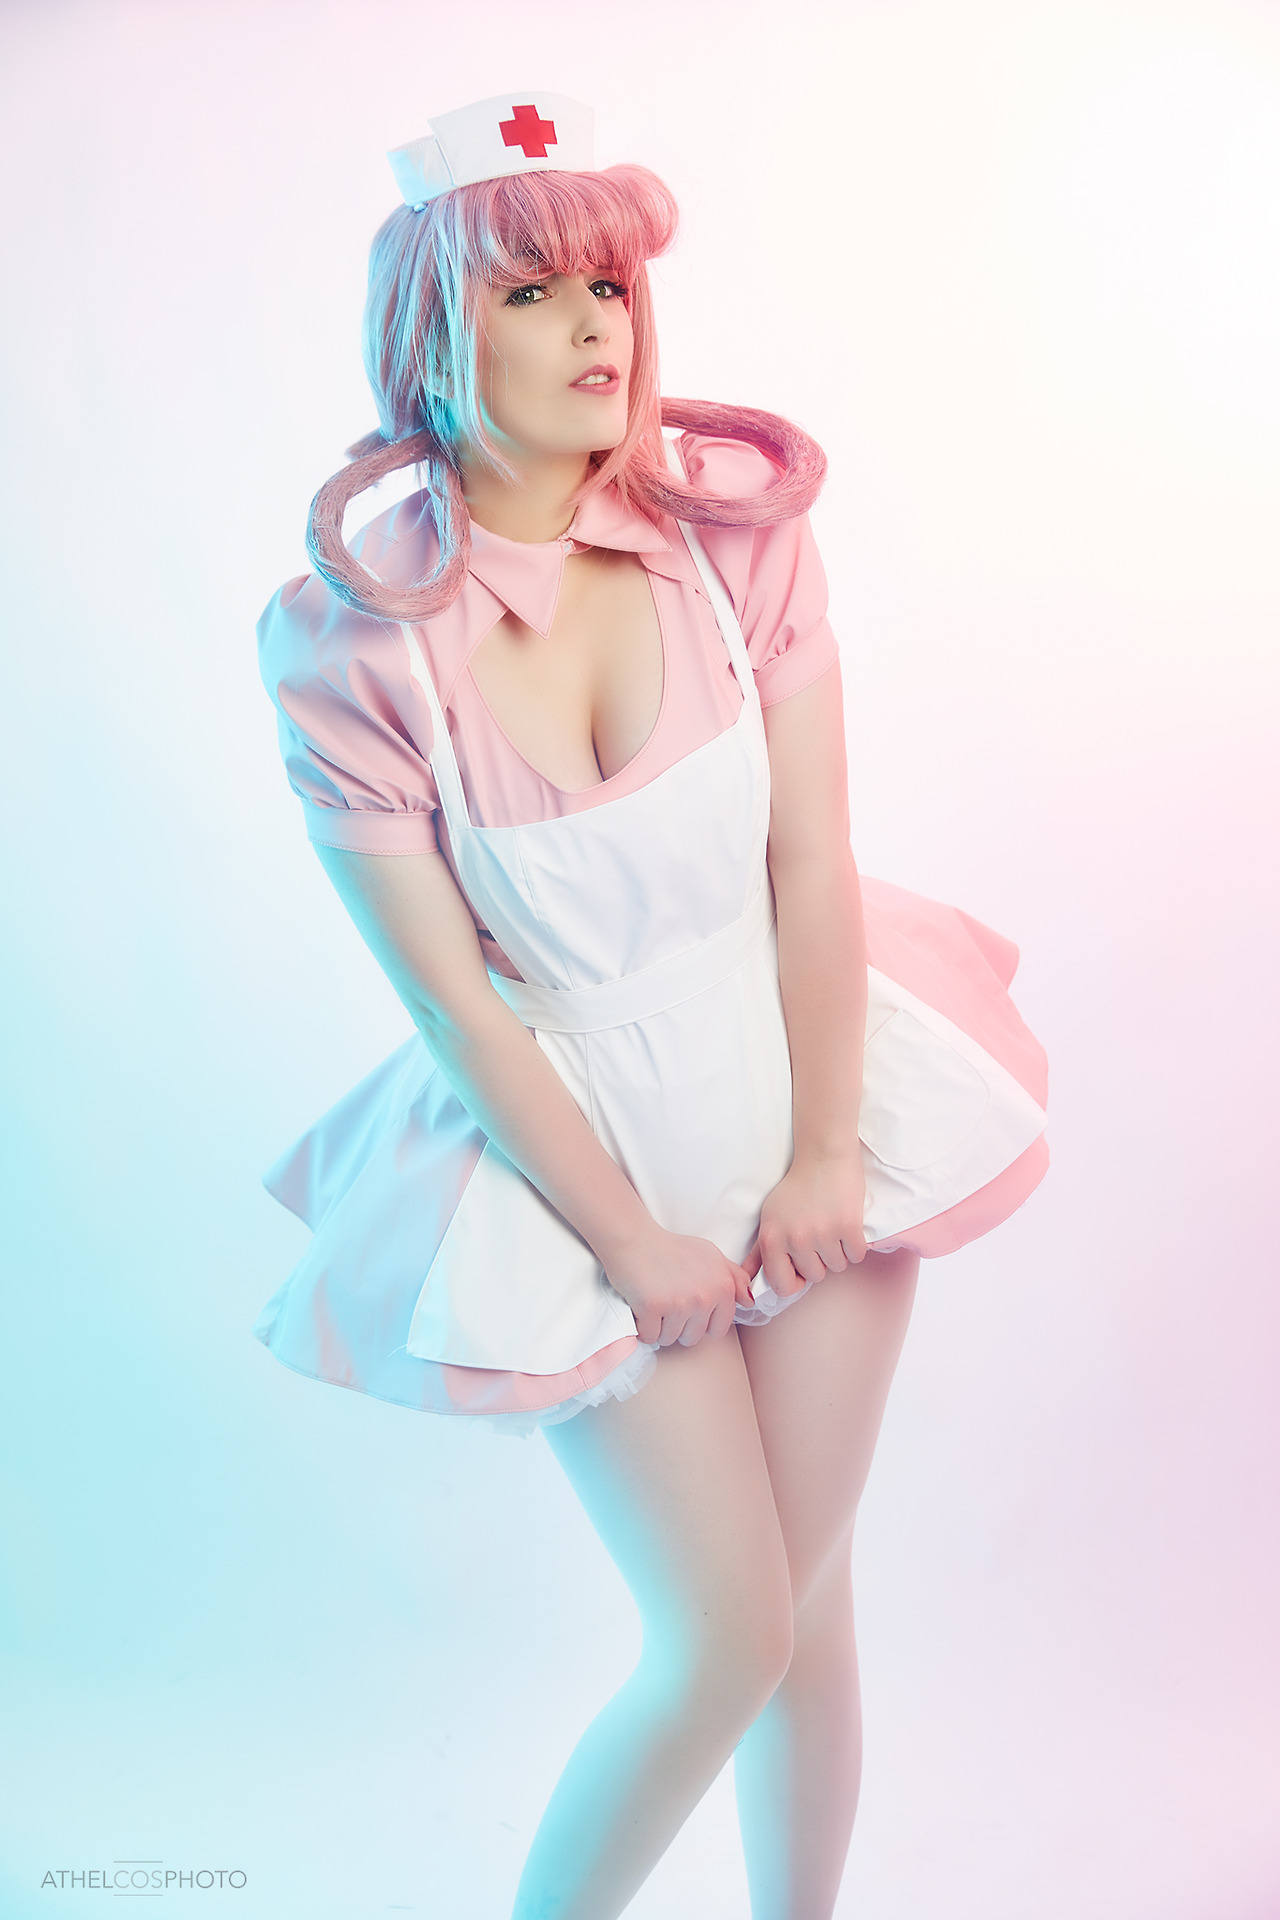 Releasing all my Nurse Joy cosplay photos that I shot with Athel! It was a great